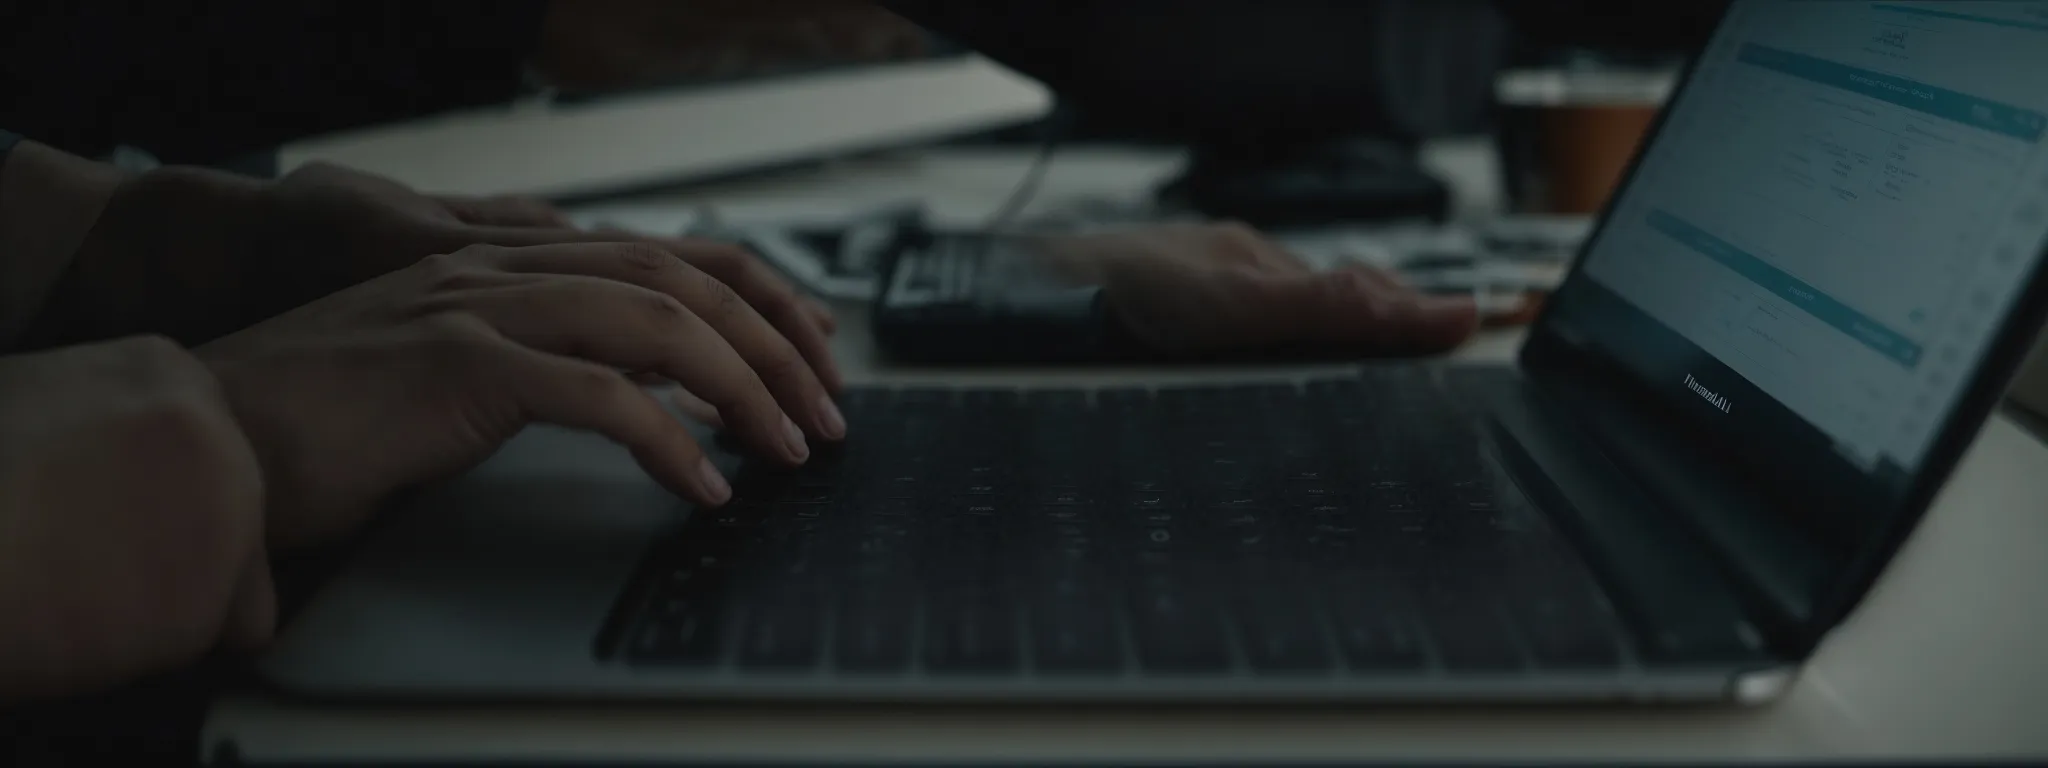 a person typing on a laptop with a clear and organized outline displayed on the screen.